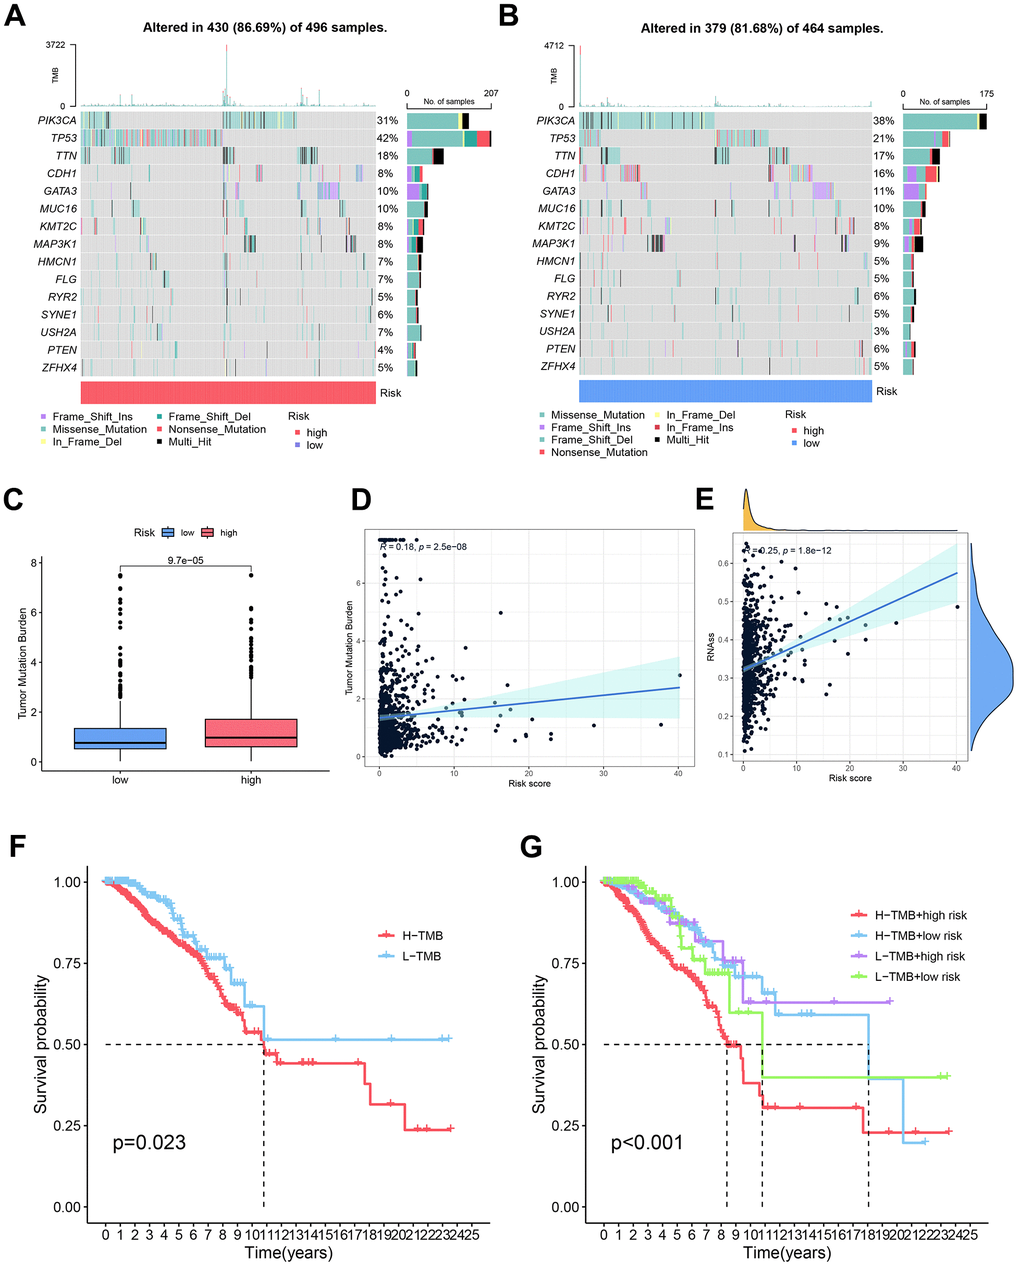 Comparative analysis of somatic mutation rates and influencing factors in high and low-risk groups. (A, B) Comprehensive assessment was undertaken to discern disparities in somatic mutations between the high and low-risk groups. (C) Observable distinctions in tumor mutation burden (TMB) were noted between the high and low-risk groups, signifying variations in the mutational landscape. (D) Investigation into the relationship between TMB and risk scores yielded insights into the connection between mutational burden and breast cancer risk. (E) Examination of the correlation between risk scores and cancer stem cells (CSCs) provided illumination on the potential involvement of CSCs in breast cancer risk. (F) Comparative analysis of survival curves over time between high and low tumor mutation burdens elucidated the impact of mutational burden on patient survival. (G) Survival curves over time were scrutinized for different combinations of tumor mutation burdens and risk scores, emphasizing the synergistic effect of mutational burden and risk scores on patient prognosis.